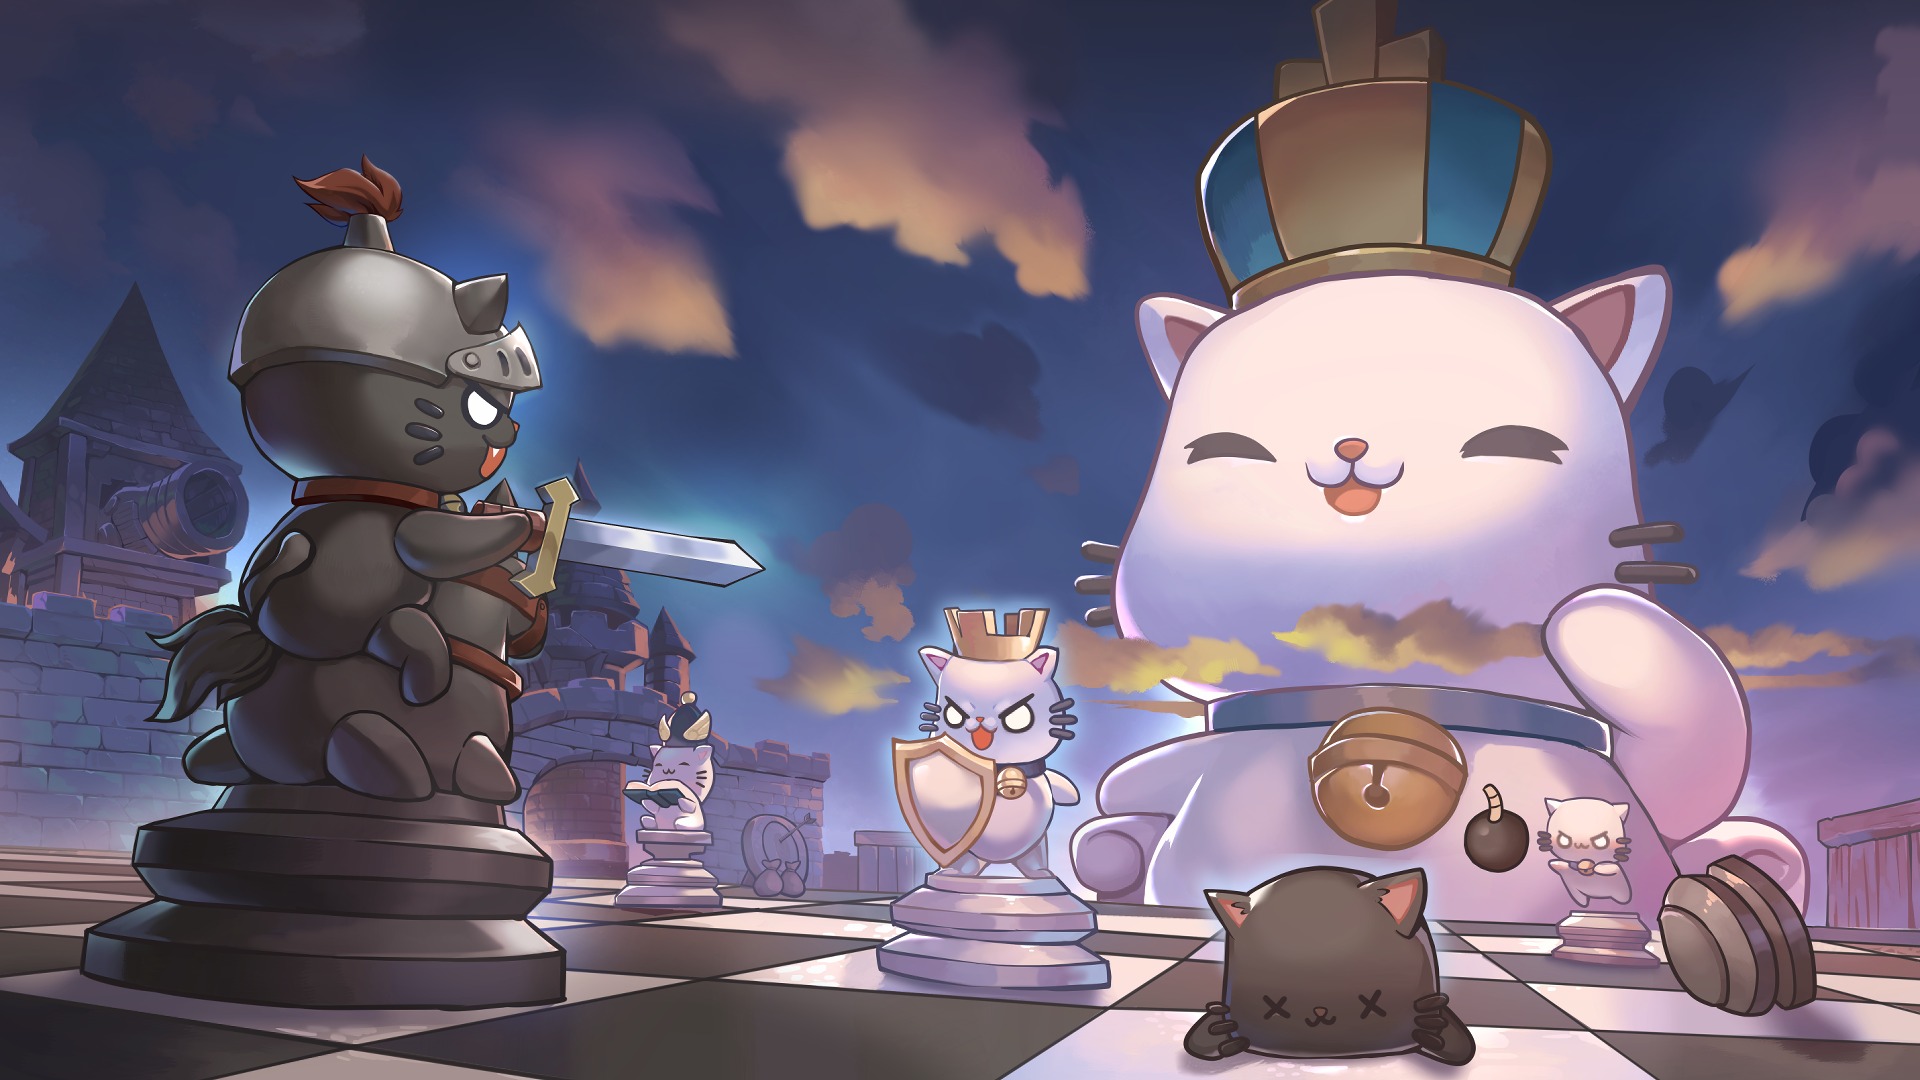 PurrChess Looks To Make Chess More Interesting By Adding Cats